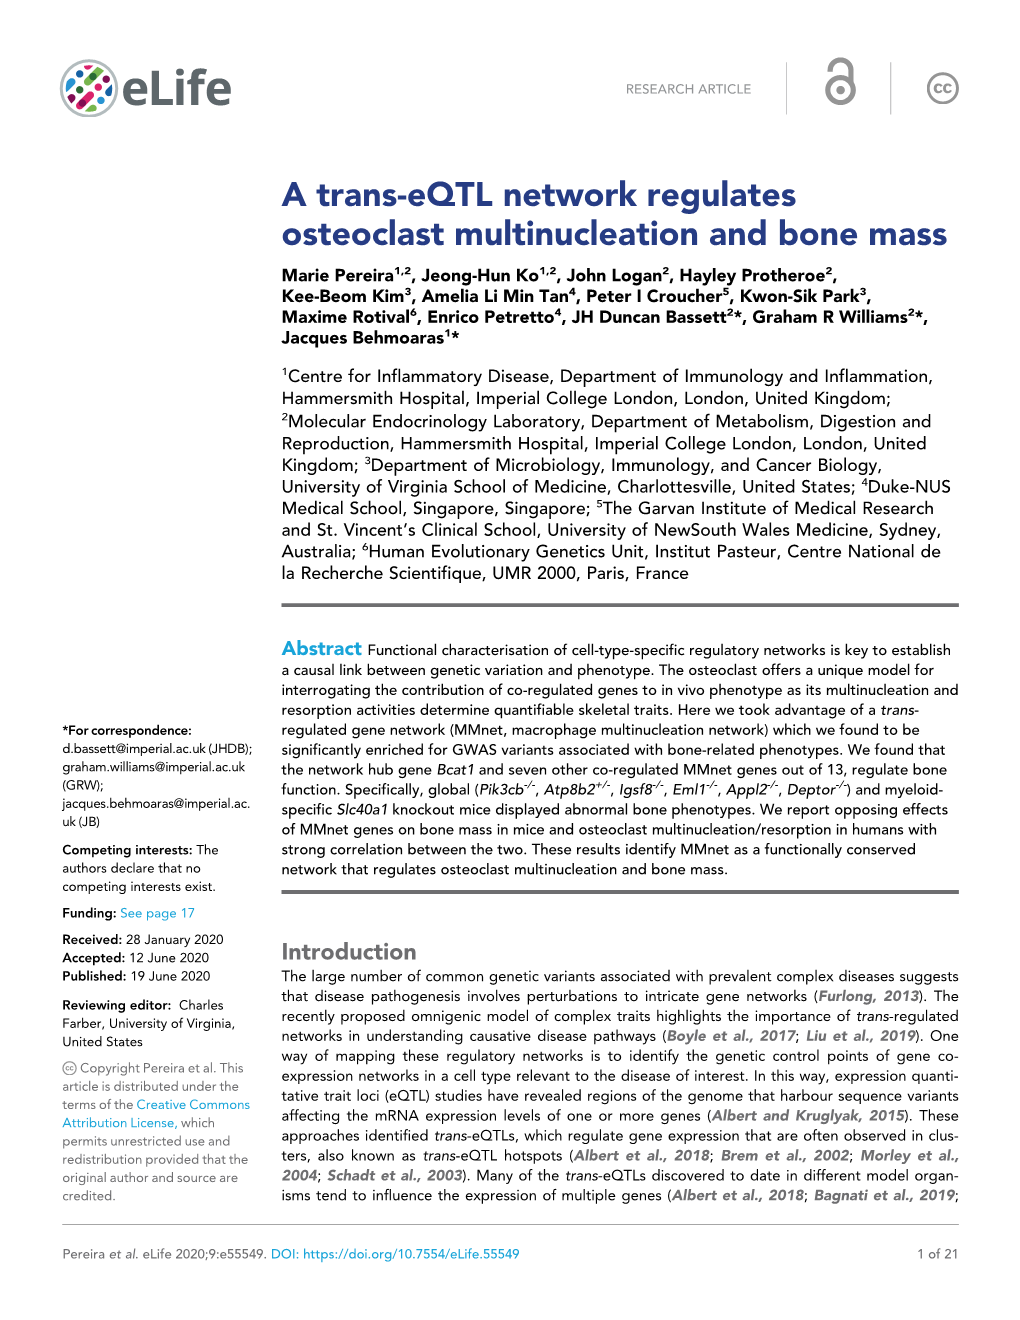 A Trans-Eqtl Network Regulates Osteoclast Multinucleation And